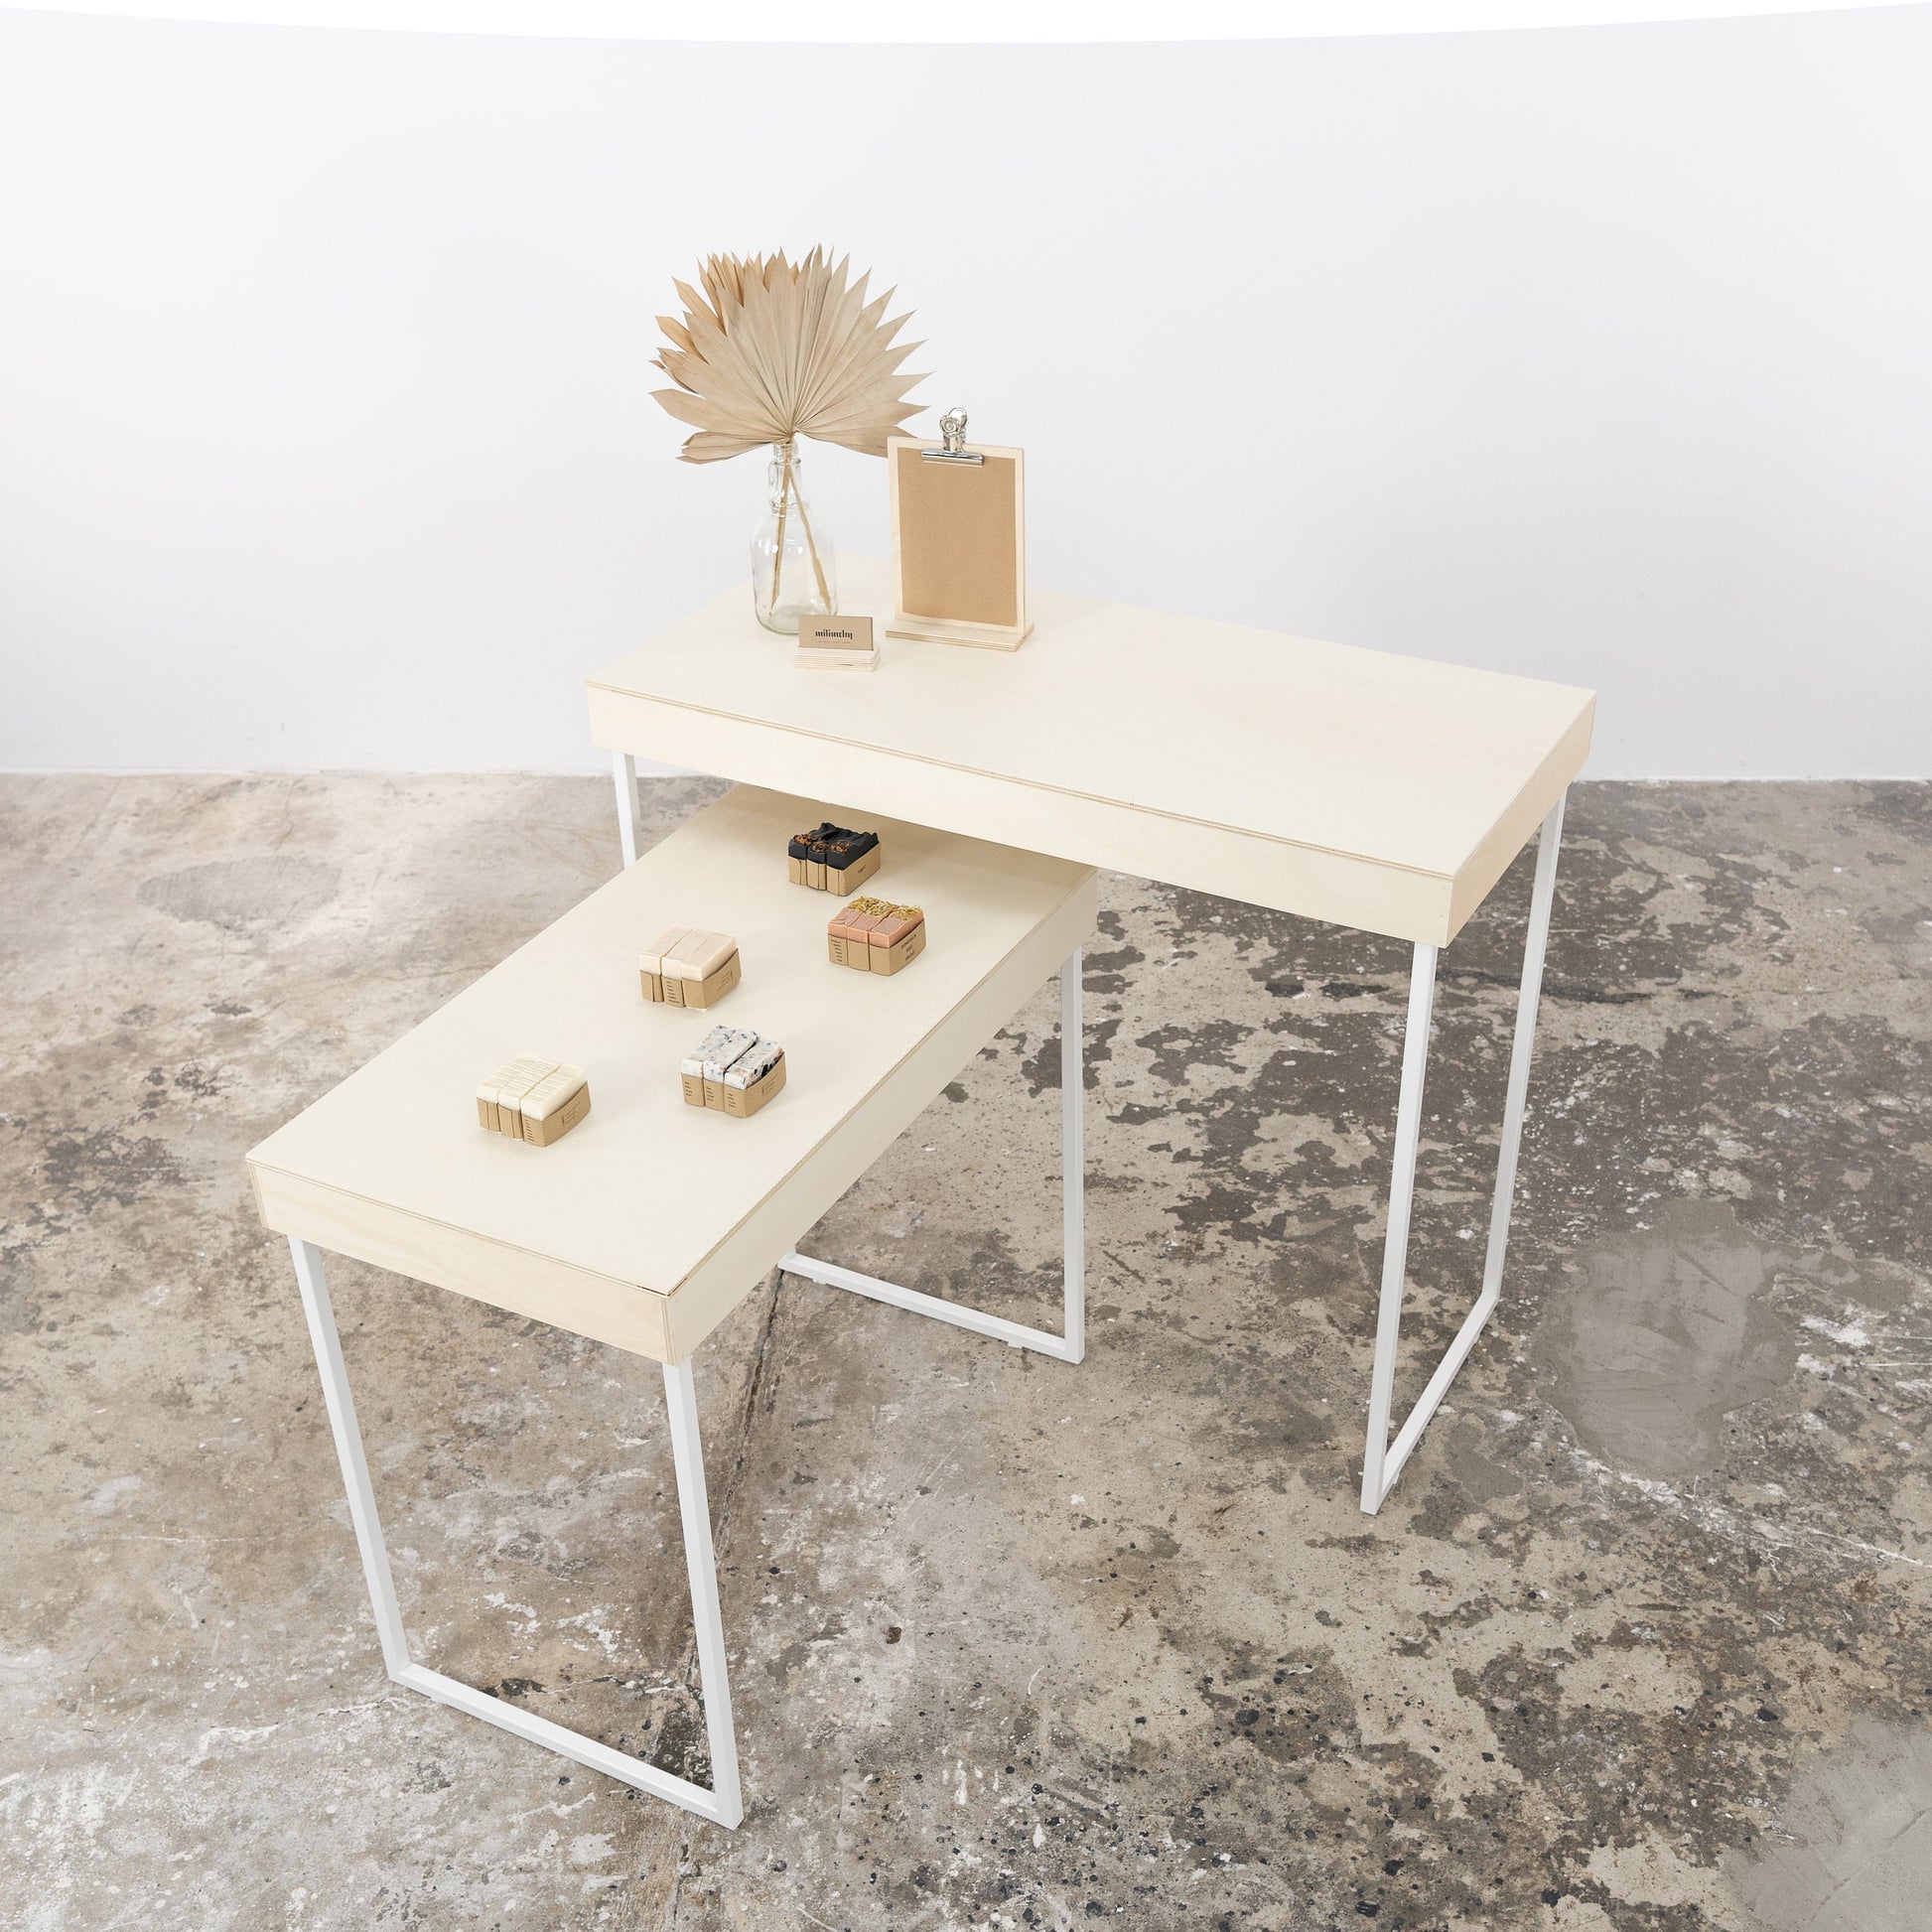 2 display tables SC-15, nesting tables, gift wrapping station, checkout station, catering table, store tiered display table | Milimetry